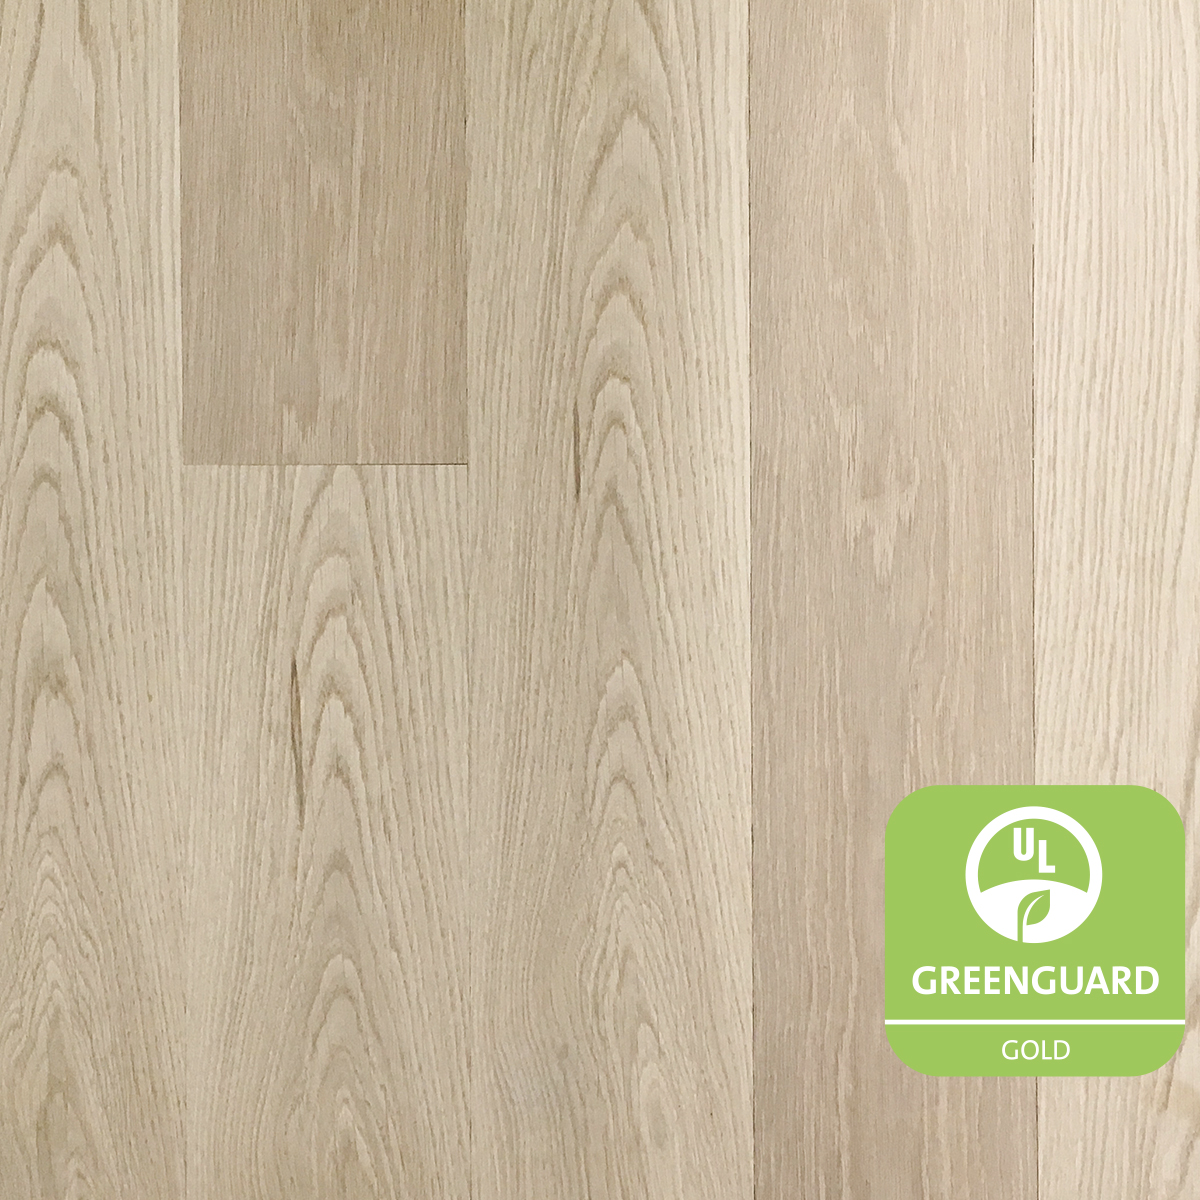 Pioneer Millworks Modern Farmhouse Clean White Oak flooring and paneling product is now UL GREENGUARD Gold Certified. It is one of 22 of the company's UL GREENGUARD Gold certified wood products.